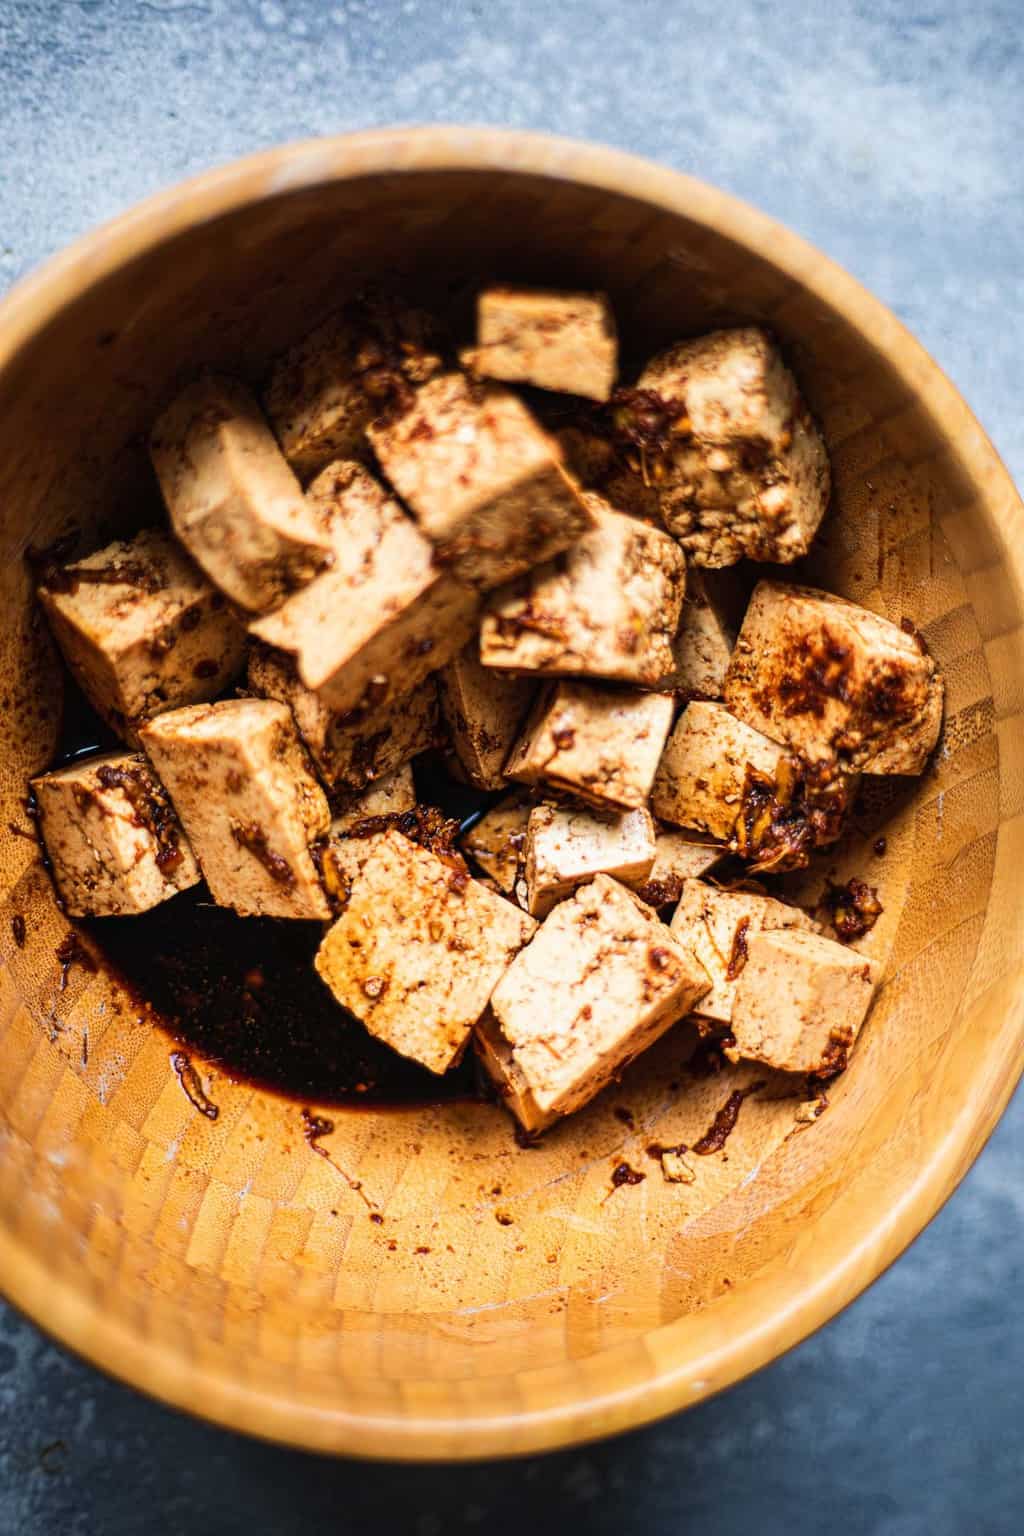 Bowl with tofu in a marinade